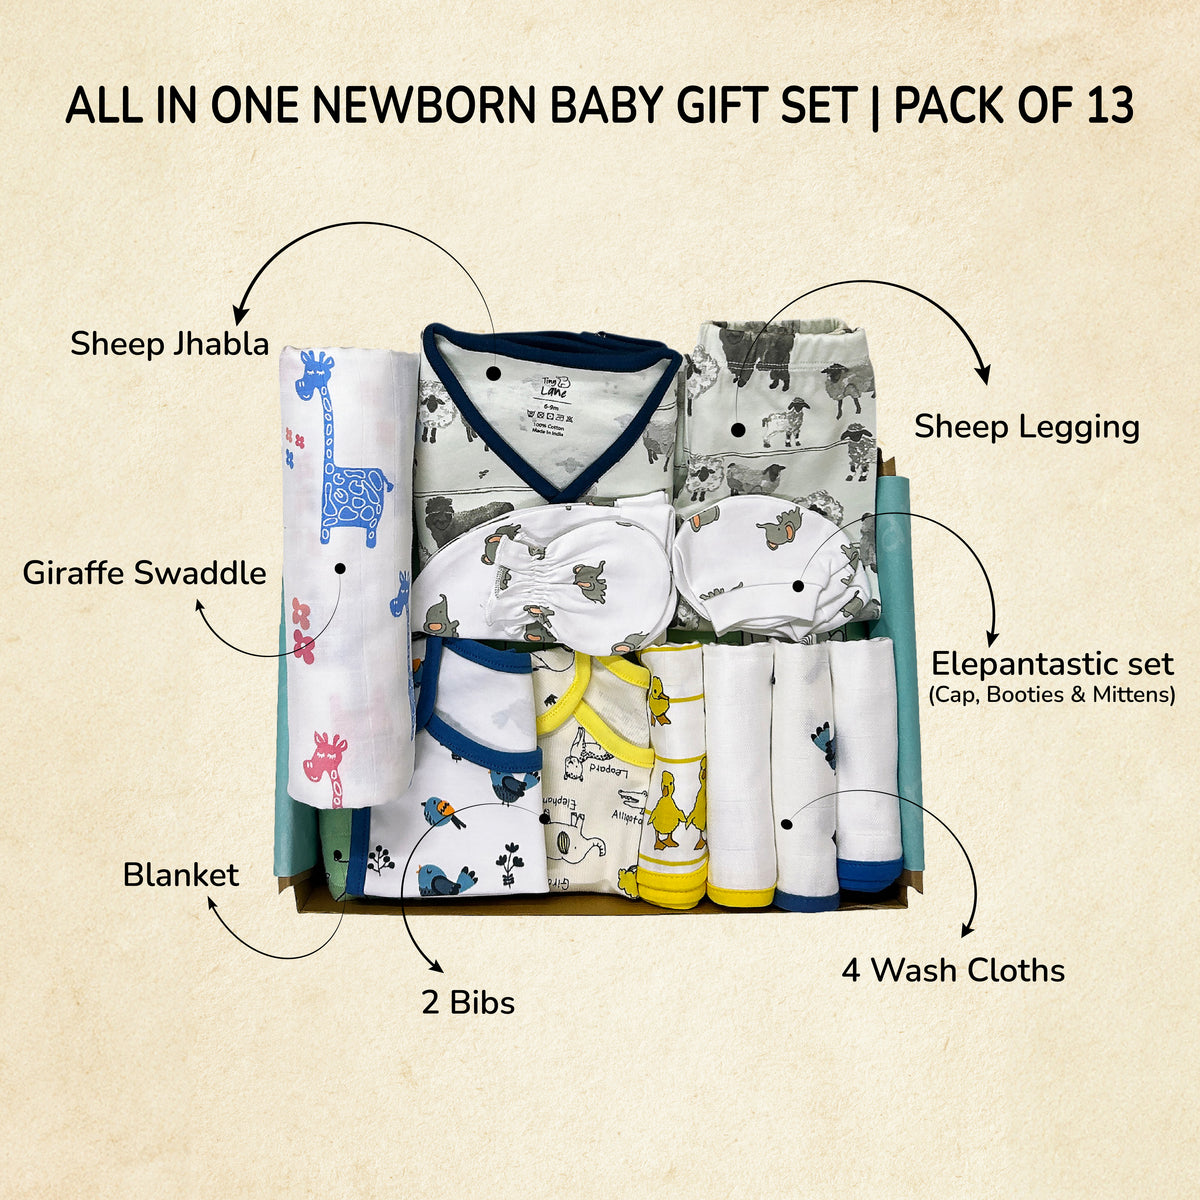 All in One Newborn Baby Gift Set | Pack of 13